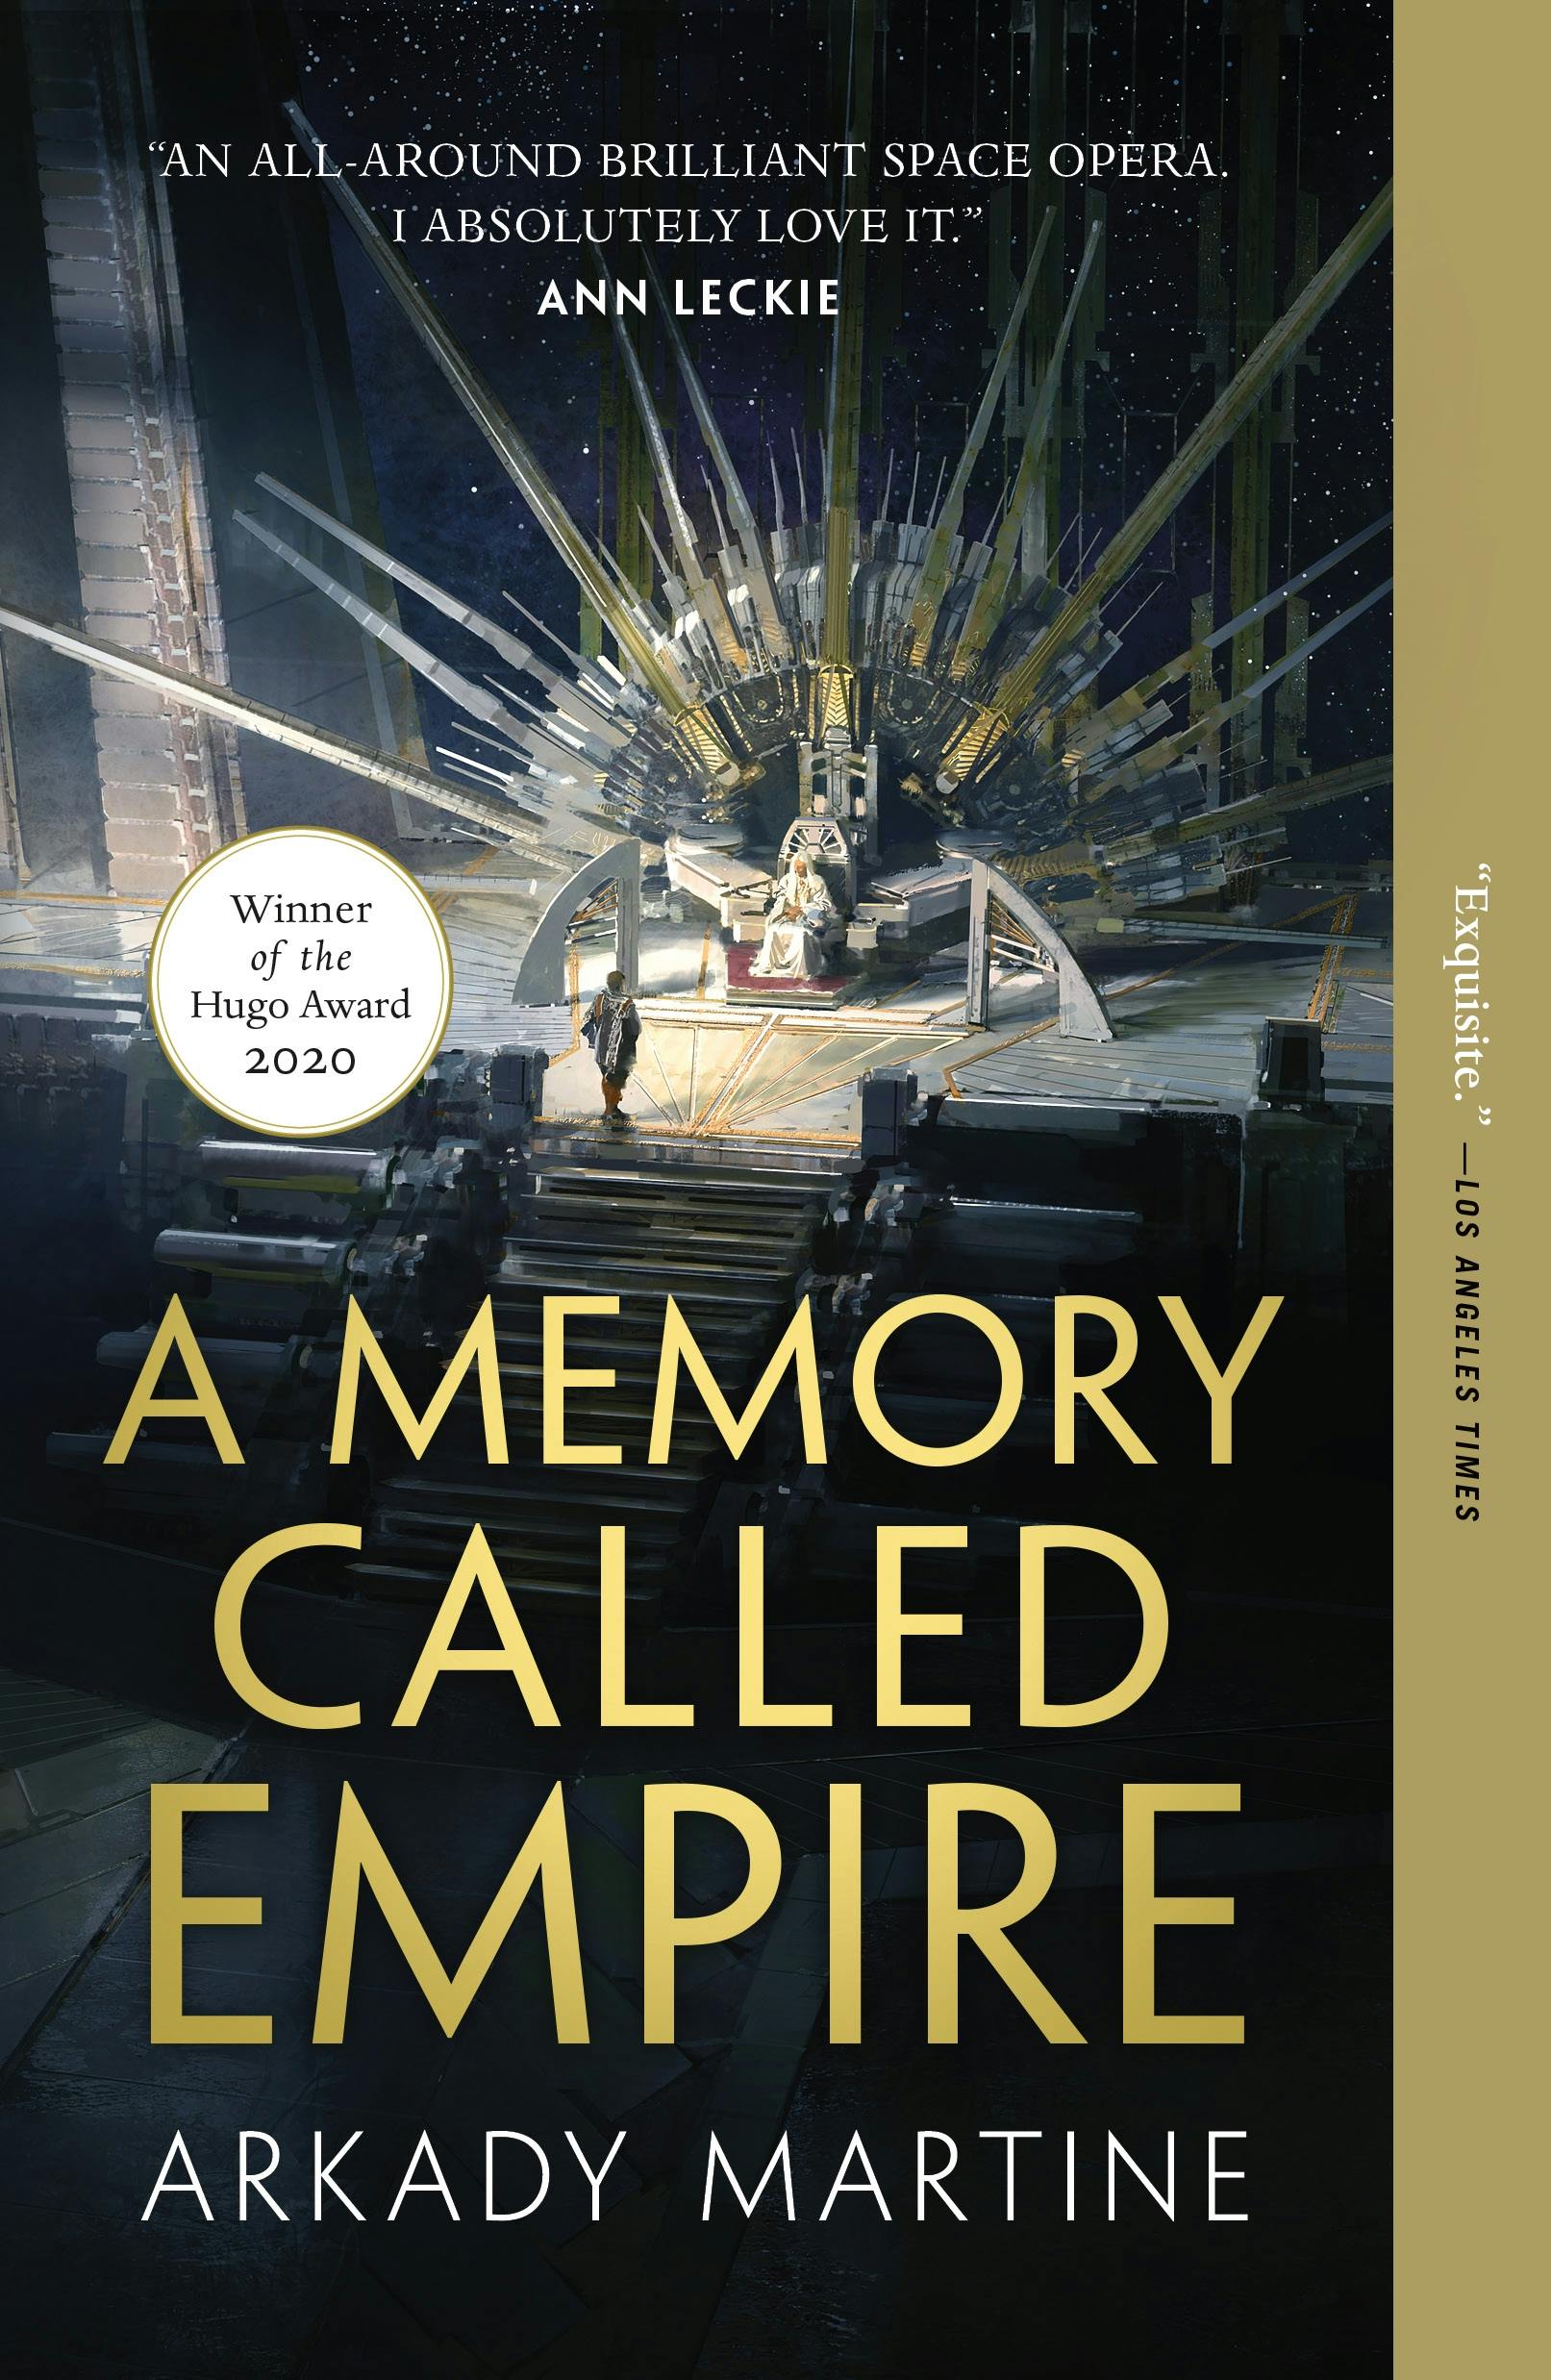 Image of A Memory Called Empire